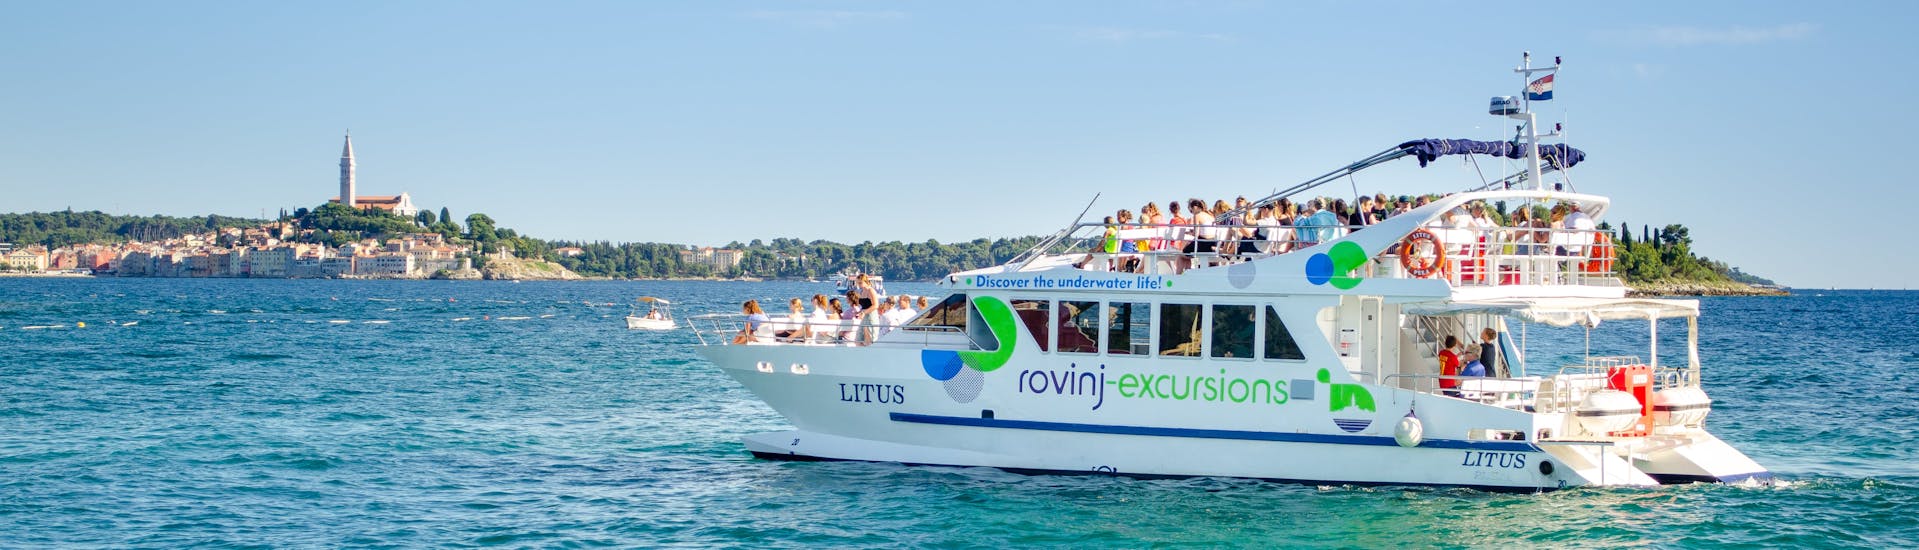 The catamaran LITUS in the crystal- clear water of Istria during the Full Day Catamaran Trip to Vrsar and Lim Fjord with Rovinj Excursions.